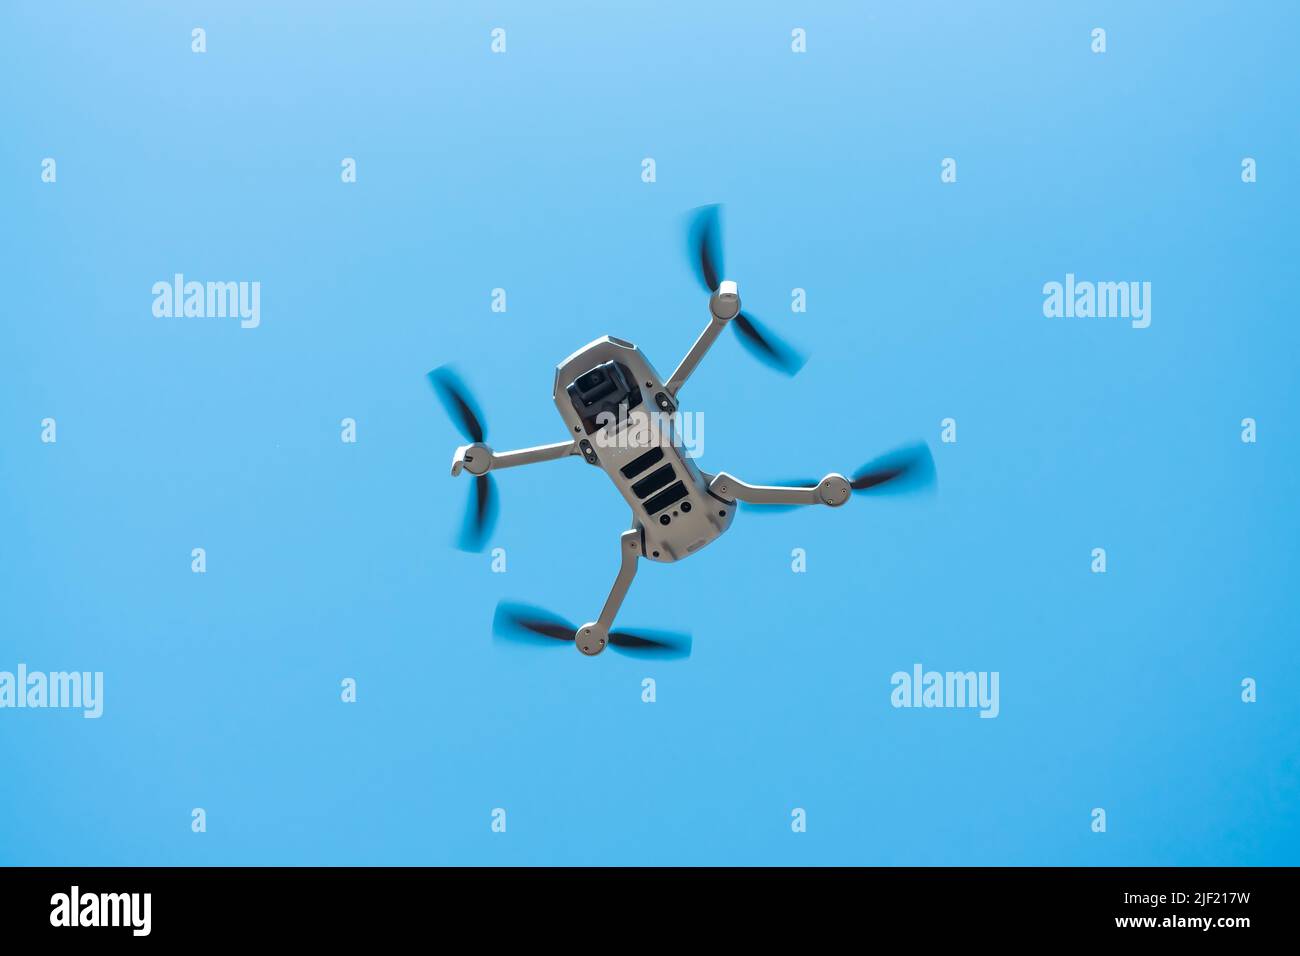 Consumer drone with camera hovering against sky Stock Photo